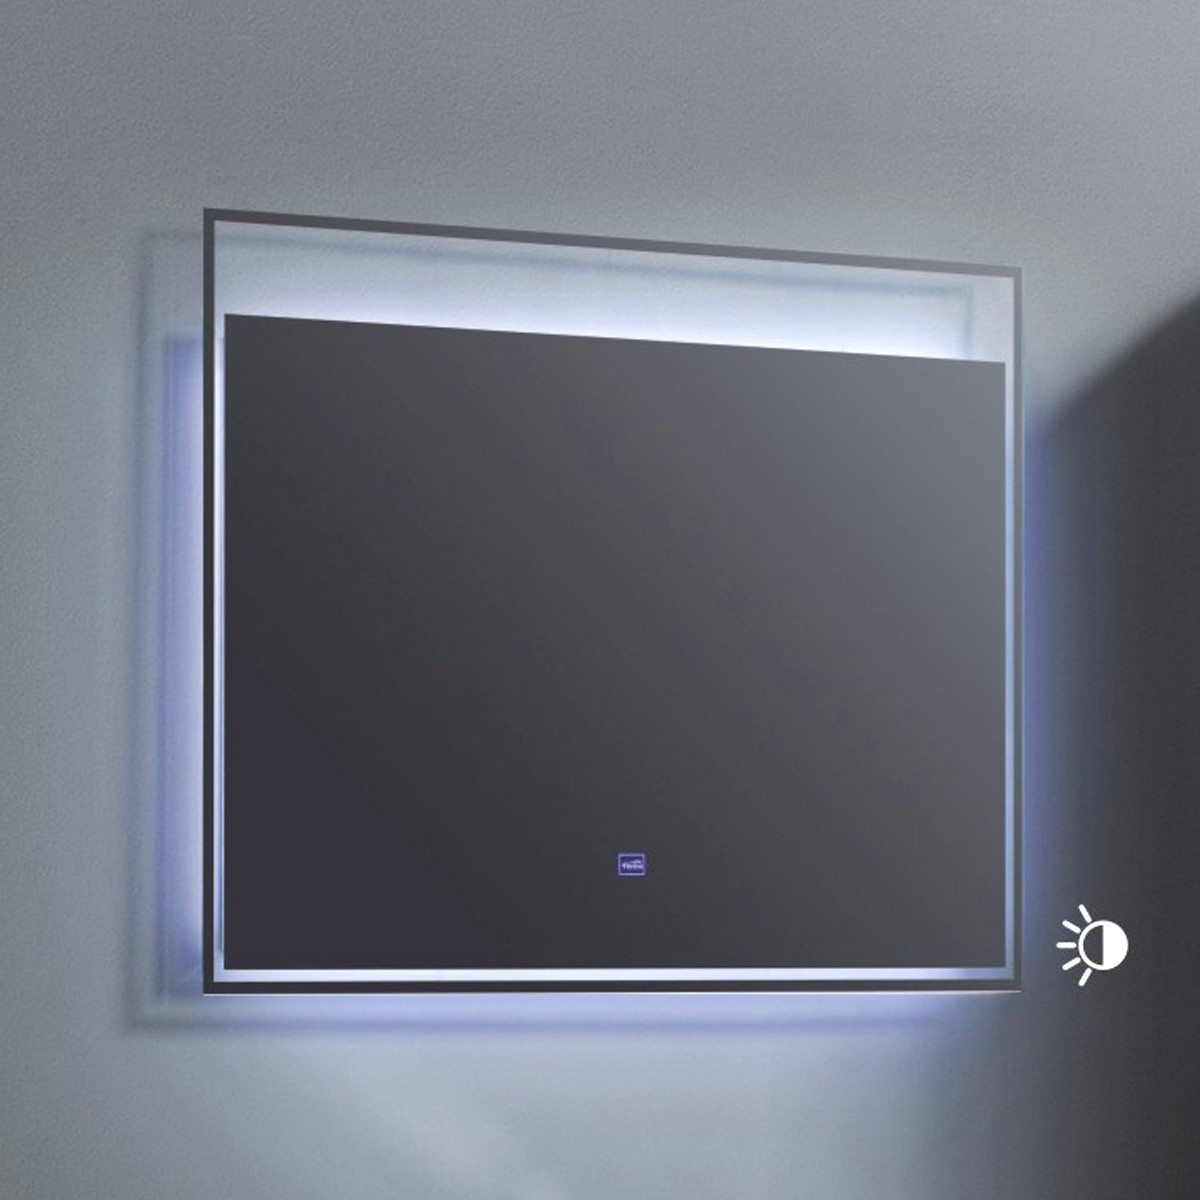 32 x 24 In. LED Mirror with Touch Button (ZRW8002-M)